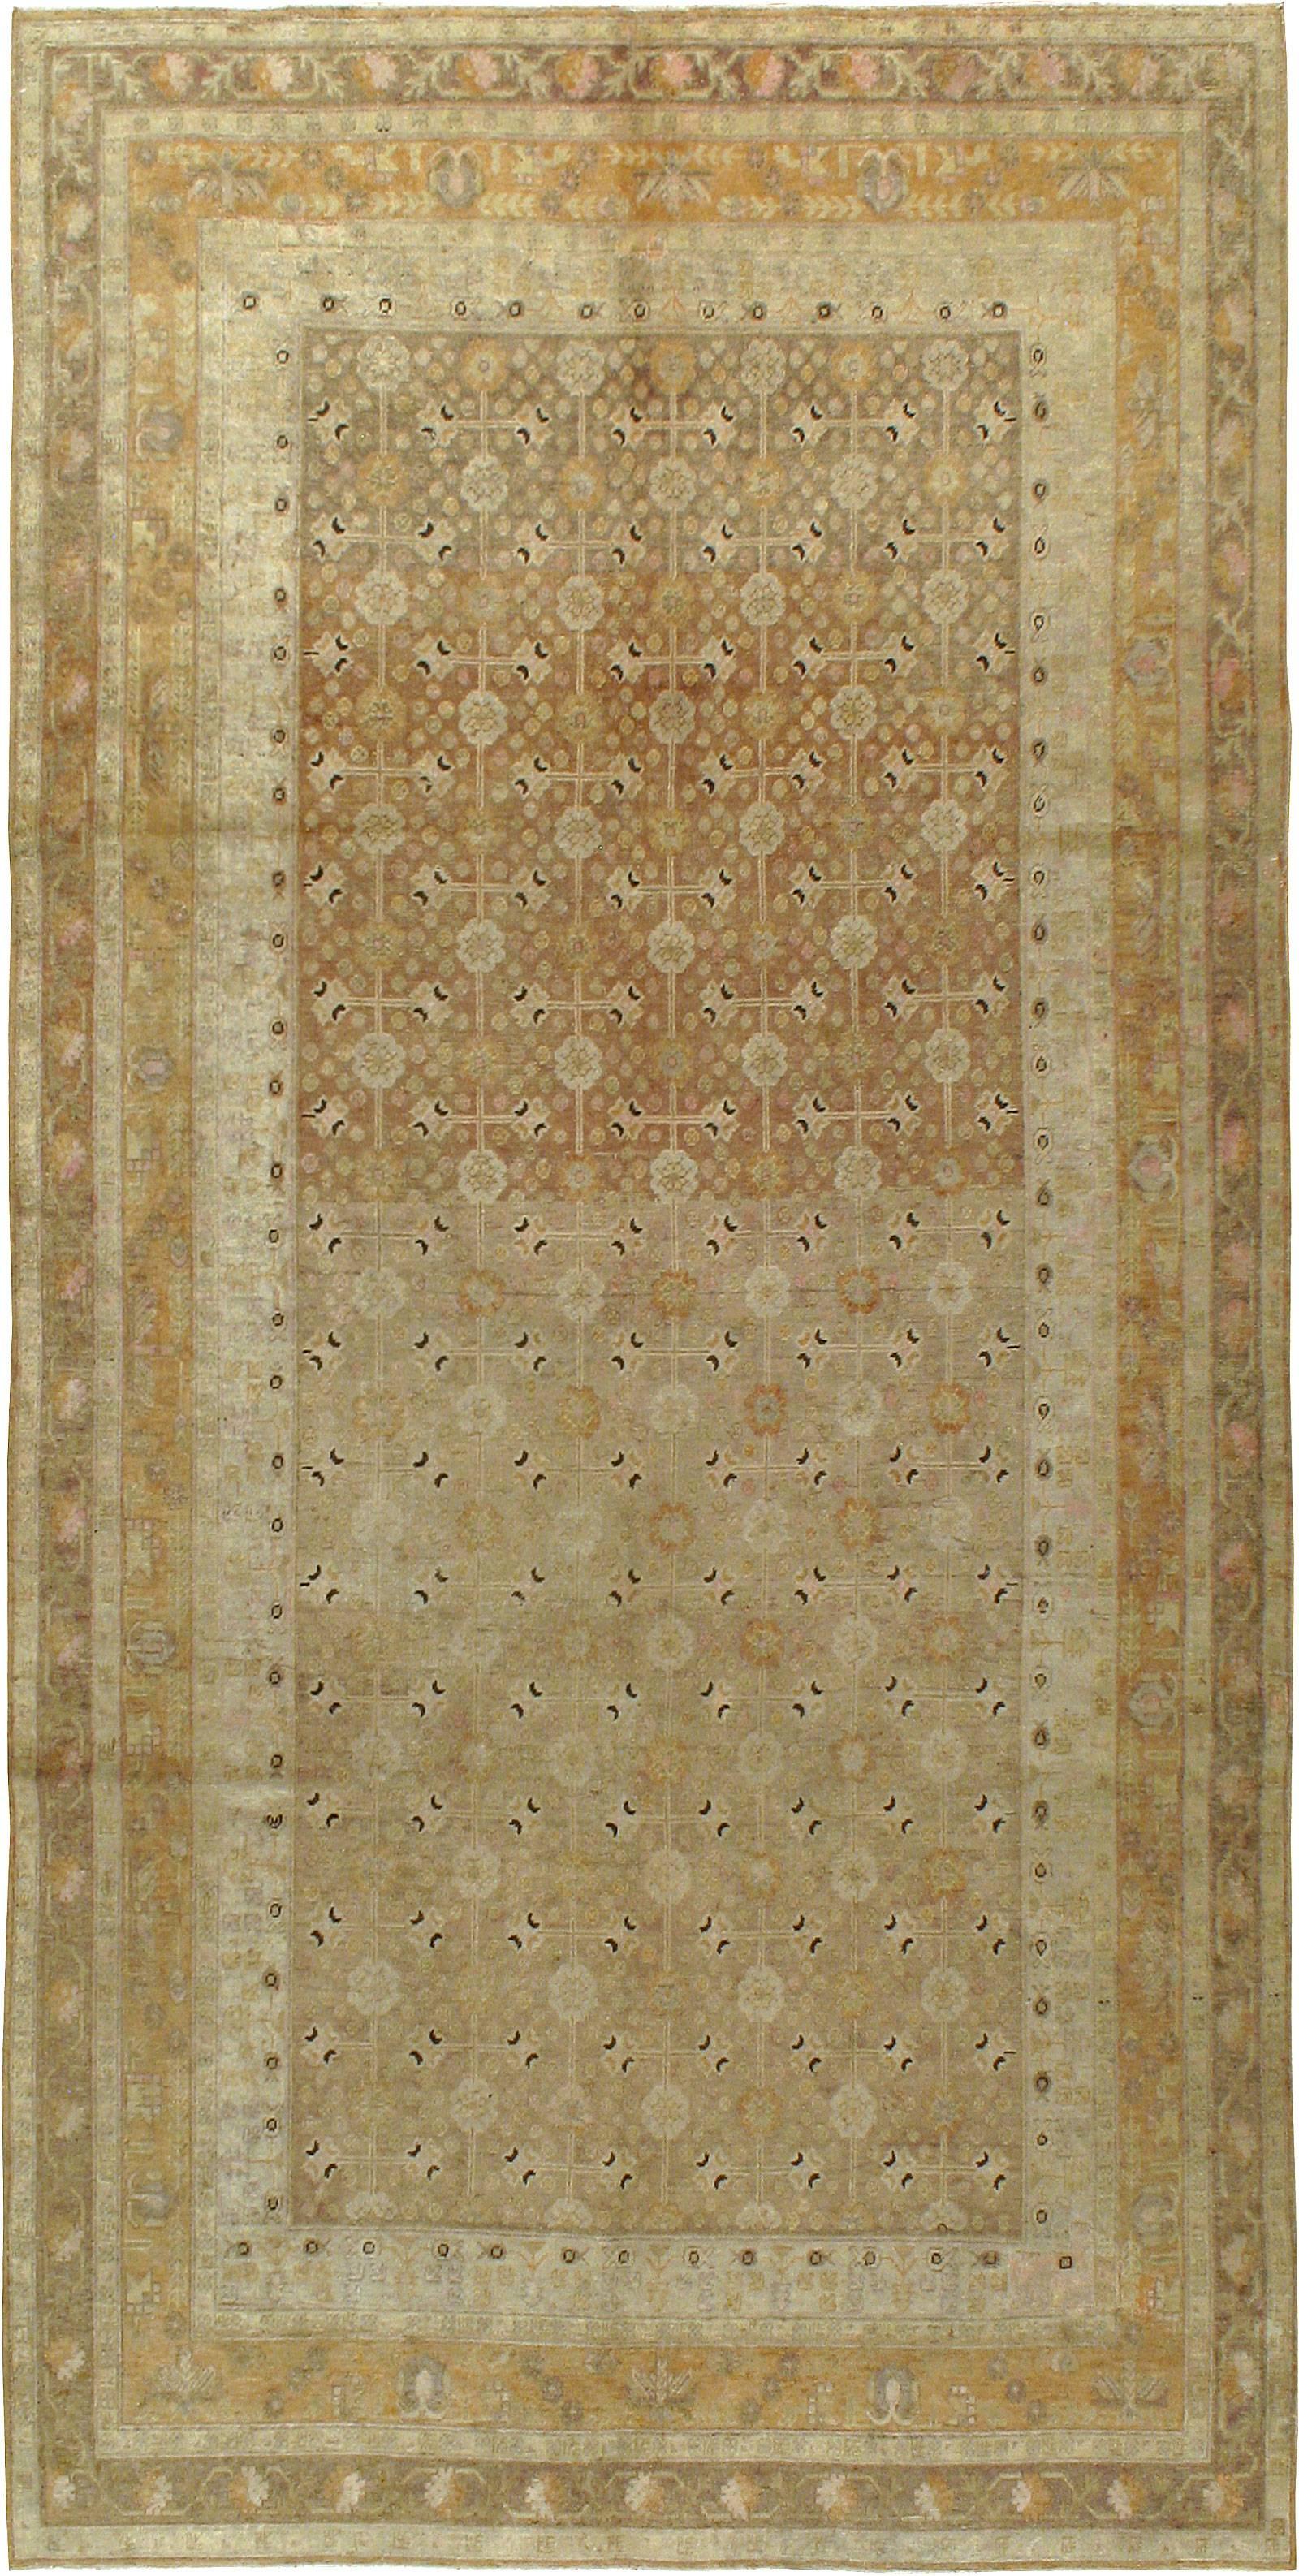 An antique East Turkestan Khotan carpet from the first quarter of the 20th century. Antique Khotan rugs and carpets were produced in the oasis town of Eastern Turkestan, today part of the Xinjiang region in Western China. This area has had a steady